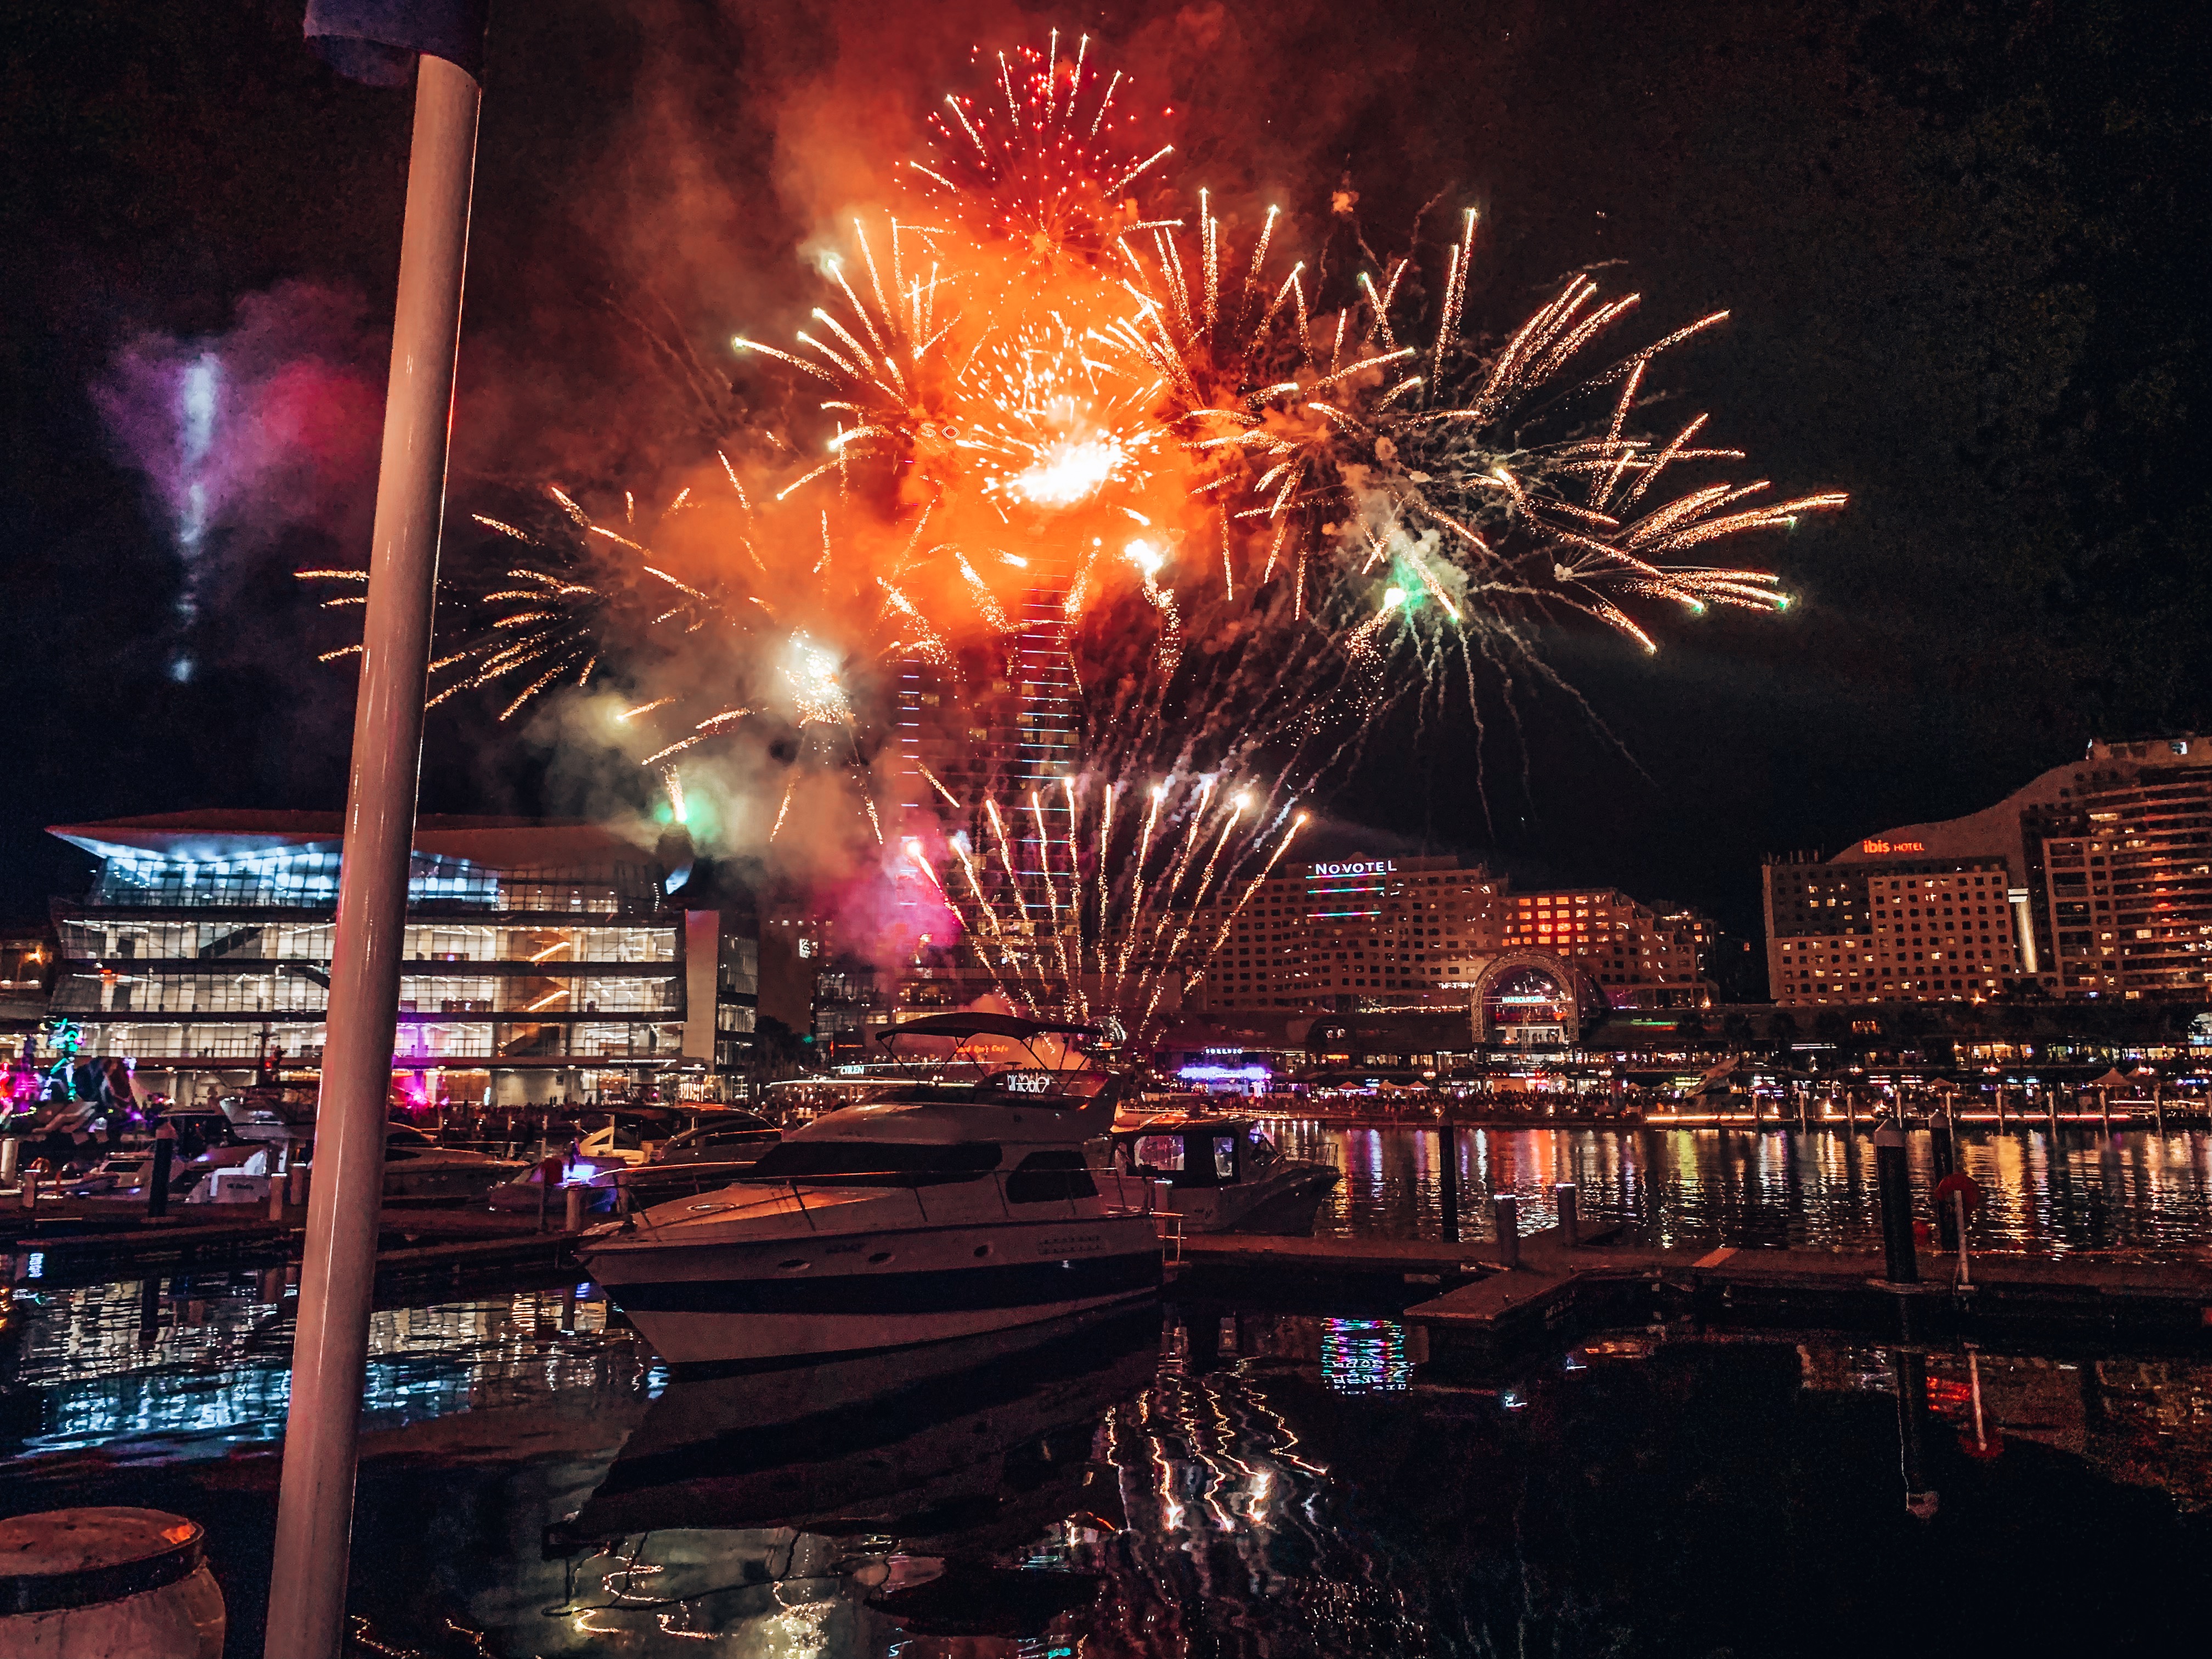 Boat docked on the harbour with fireworks exploding in the background